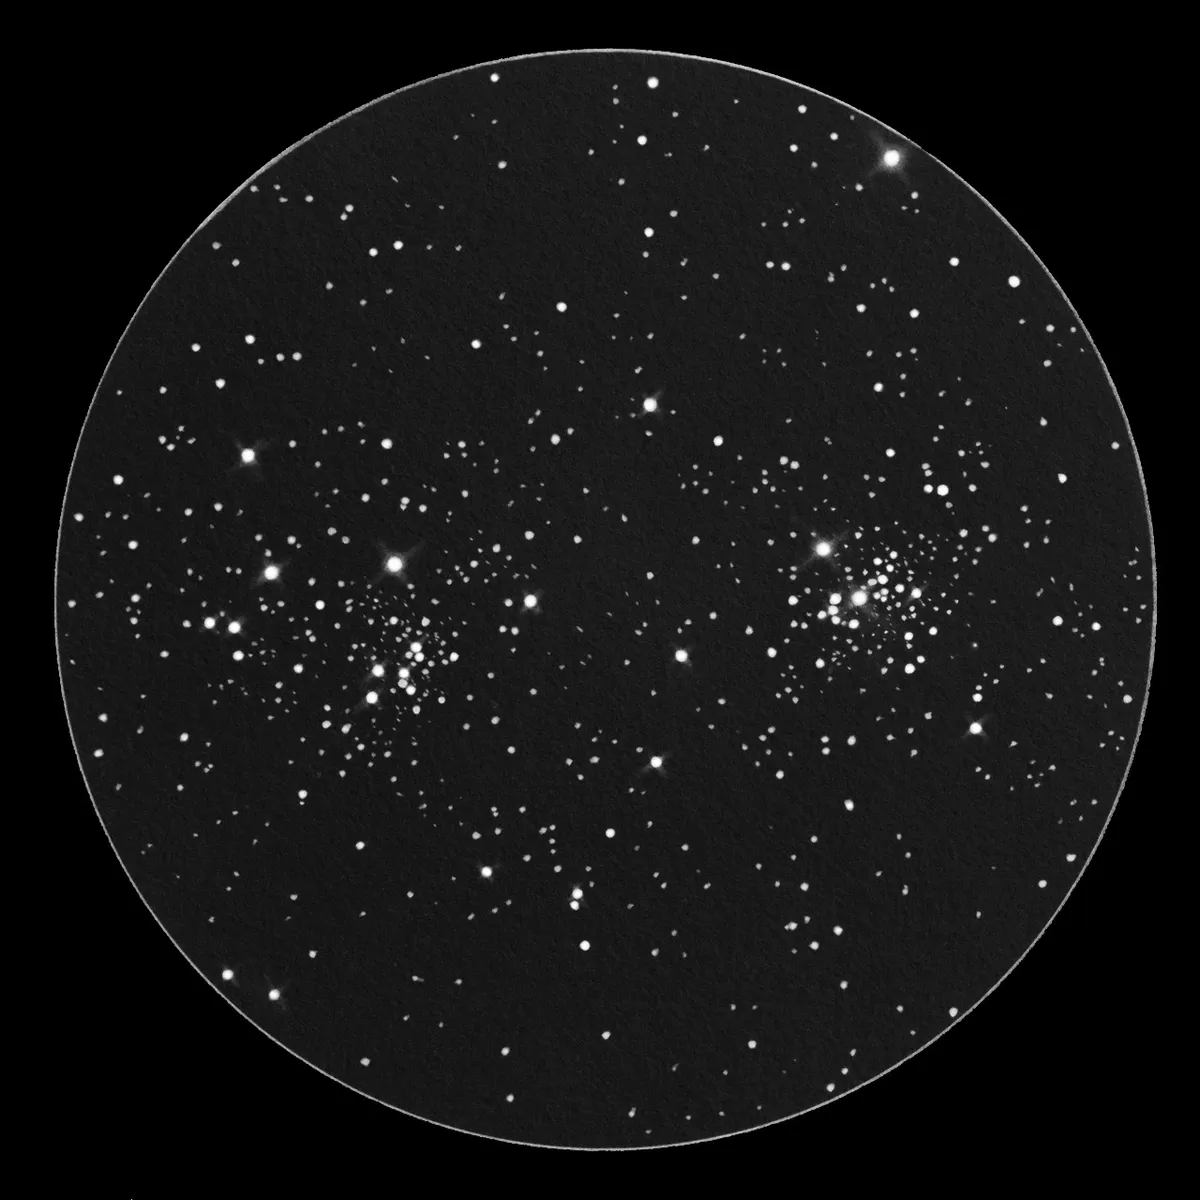  View of the Perseus double cluster through a 10-inch telescope, 77x magnification. Credit: Michael Vlasov